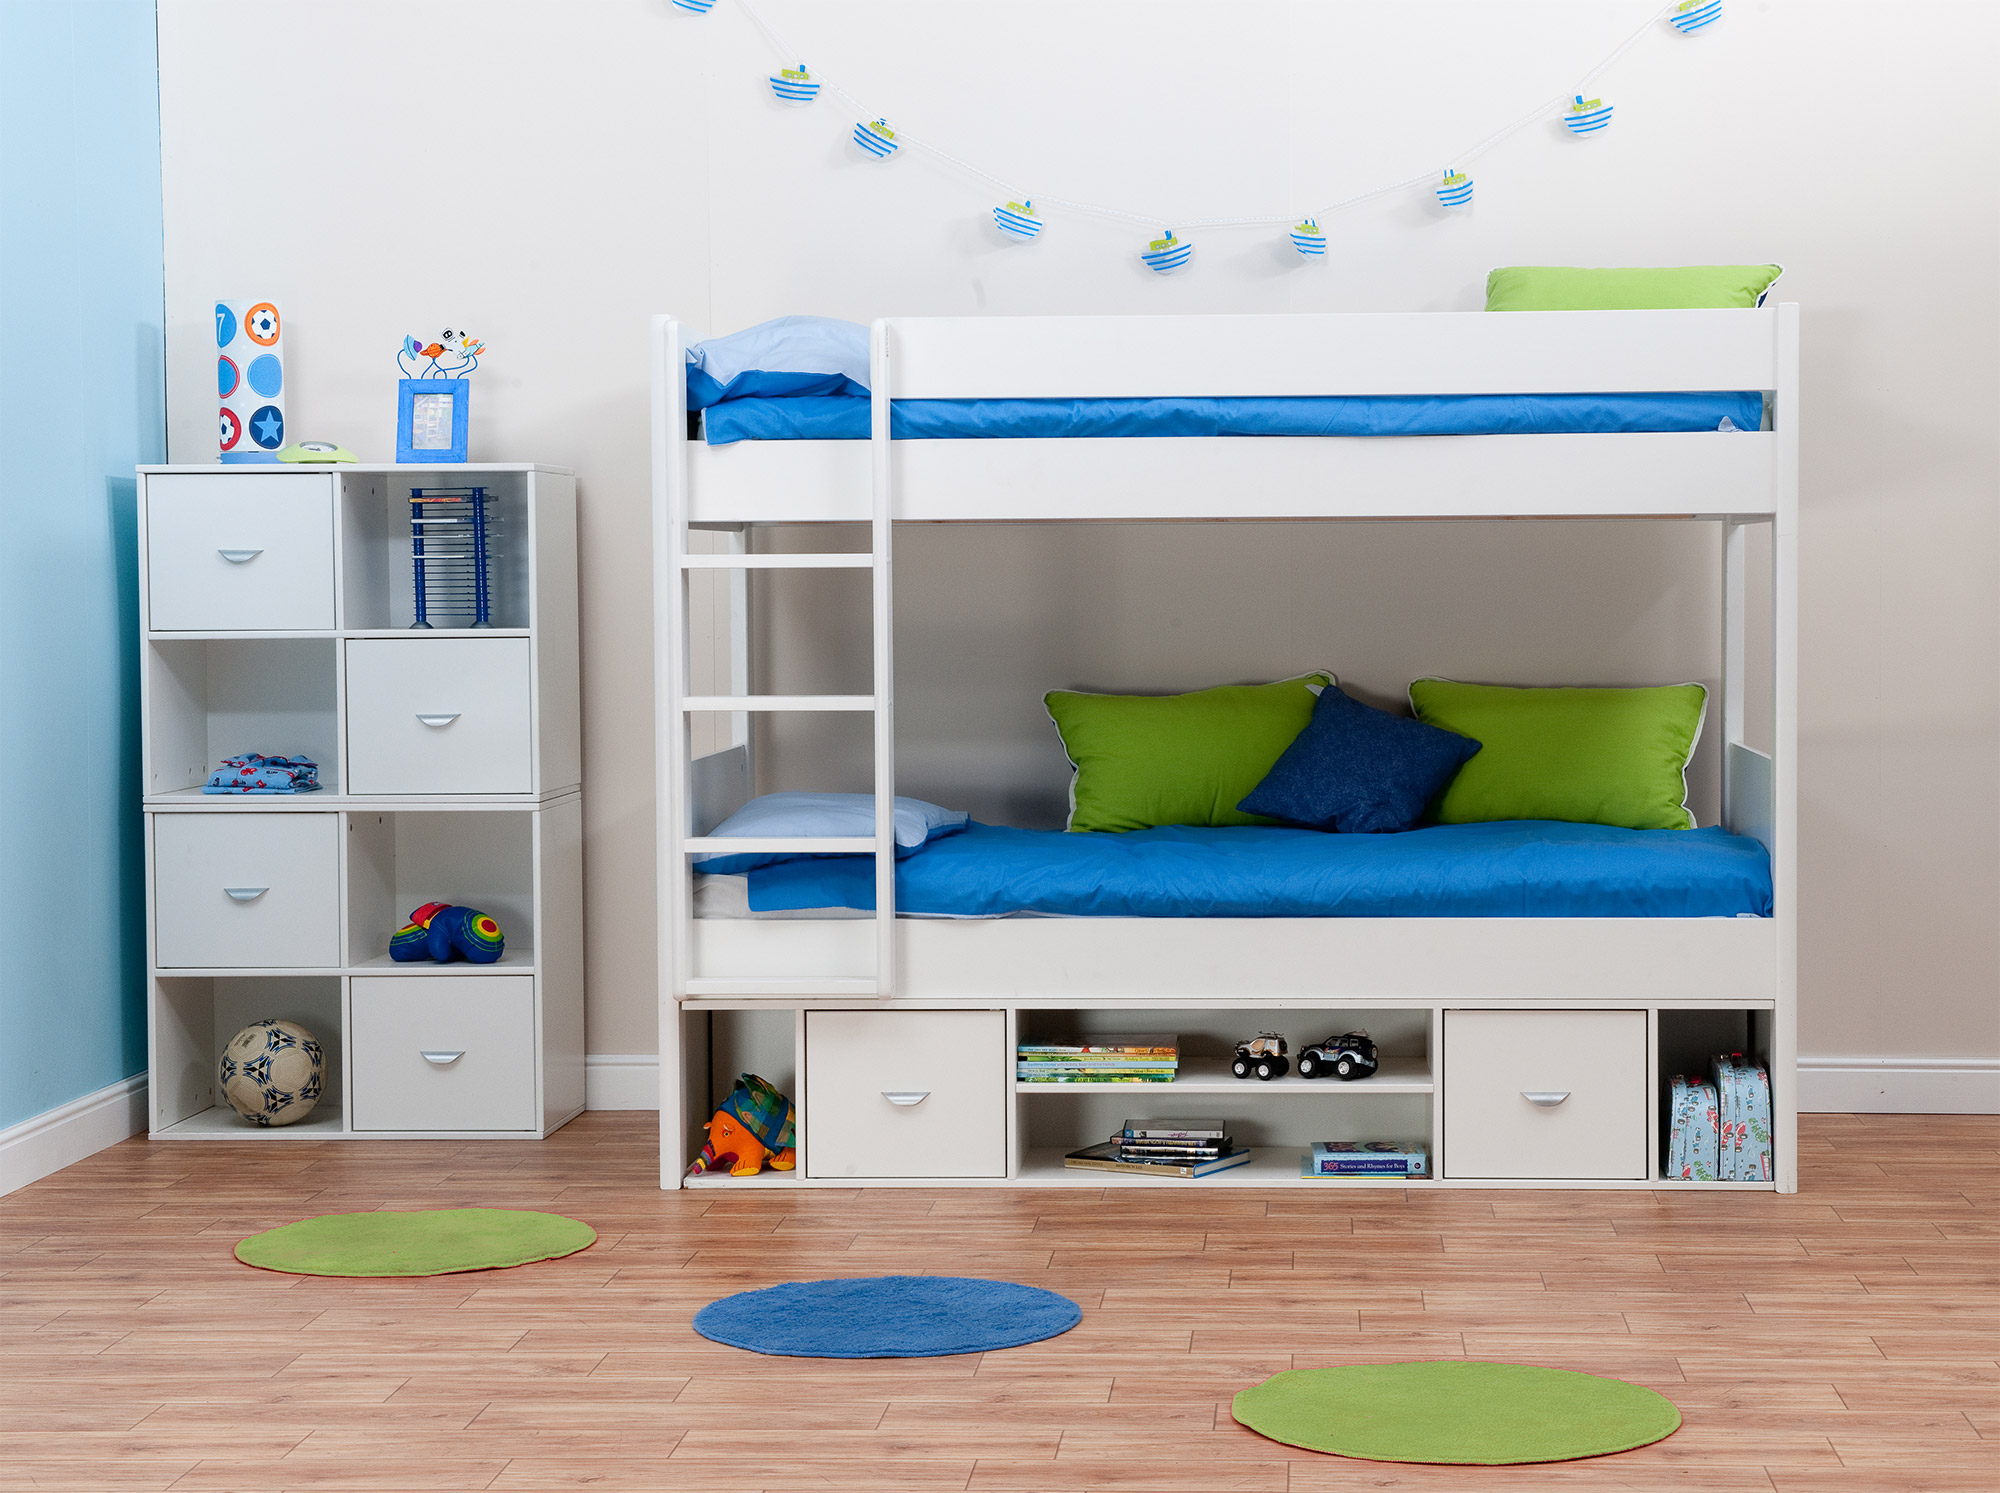 bedroom-modern-white-furniture-bunk-beds-for-small-spaces-design-with-blue-mattress-and-shelves-plus-wooden-laminate-floor-brilliant-beds-for-small-spaces-for-efficient-use-of-available